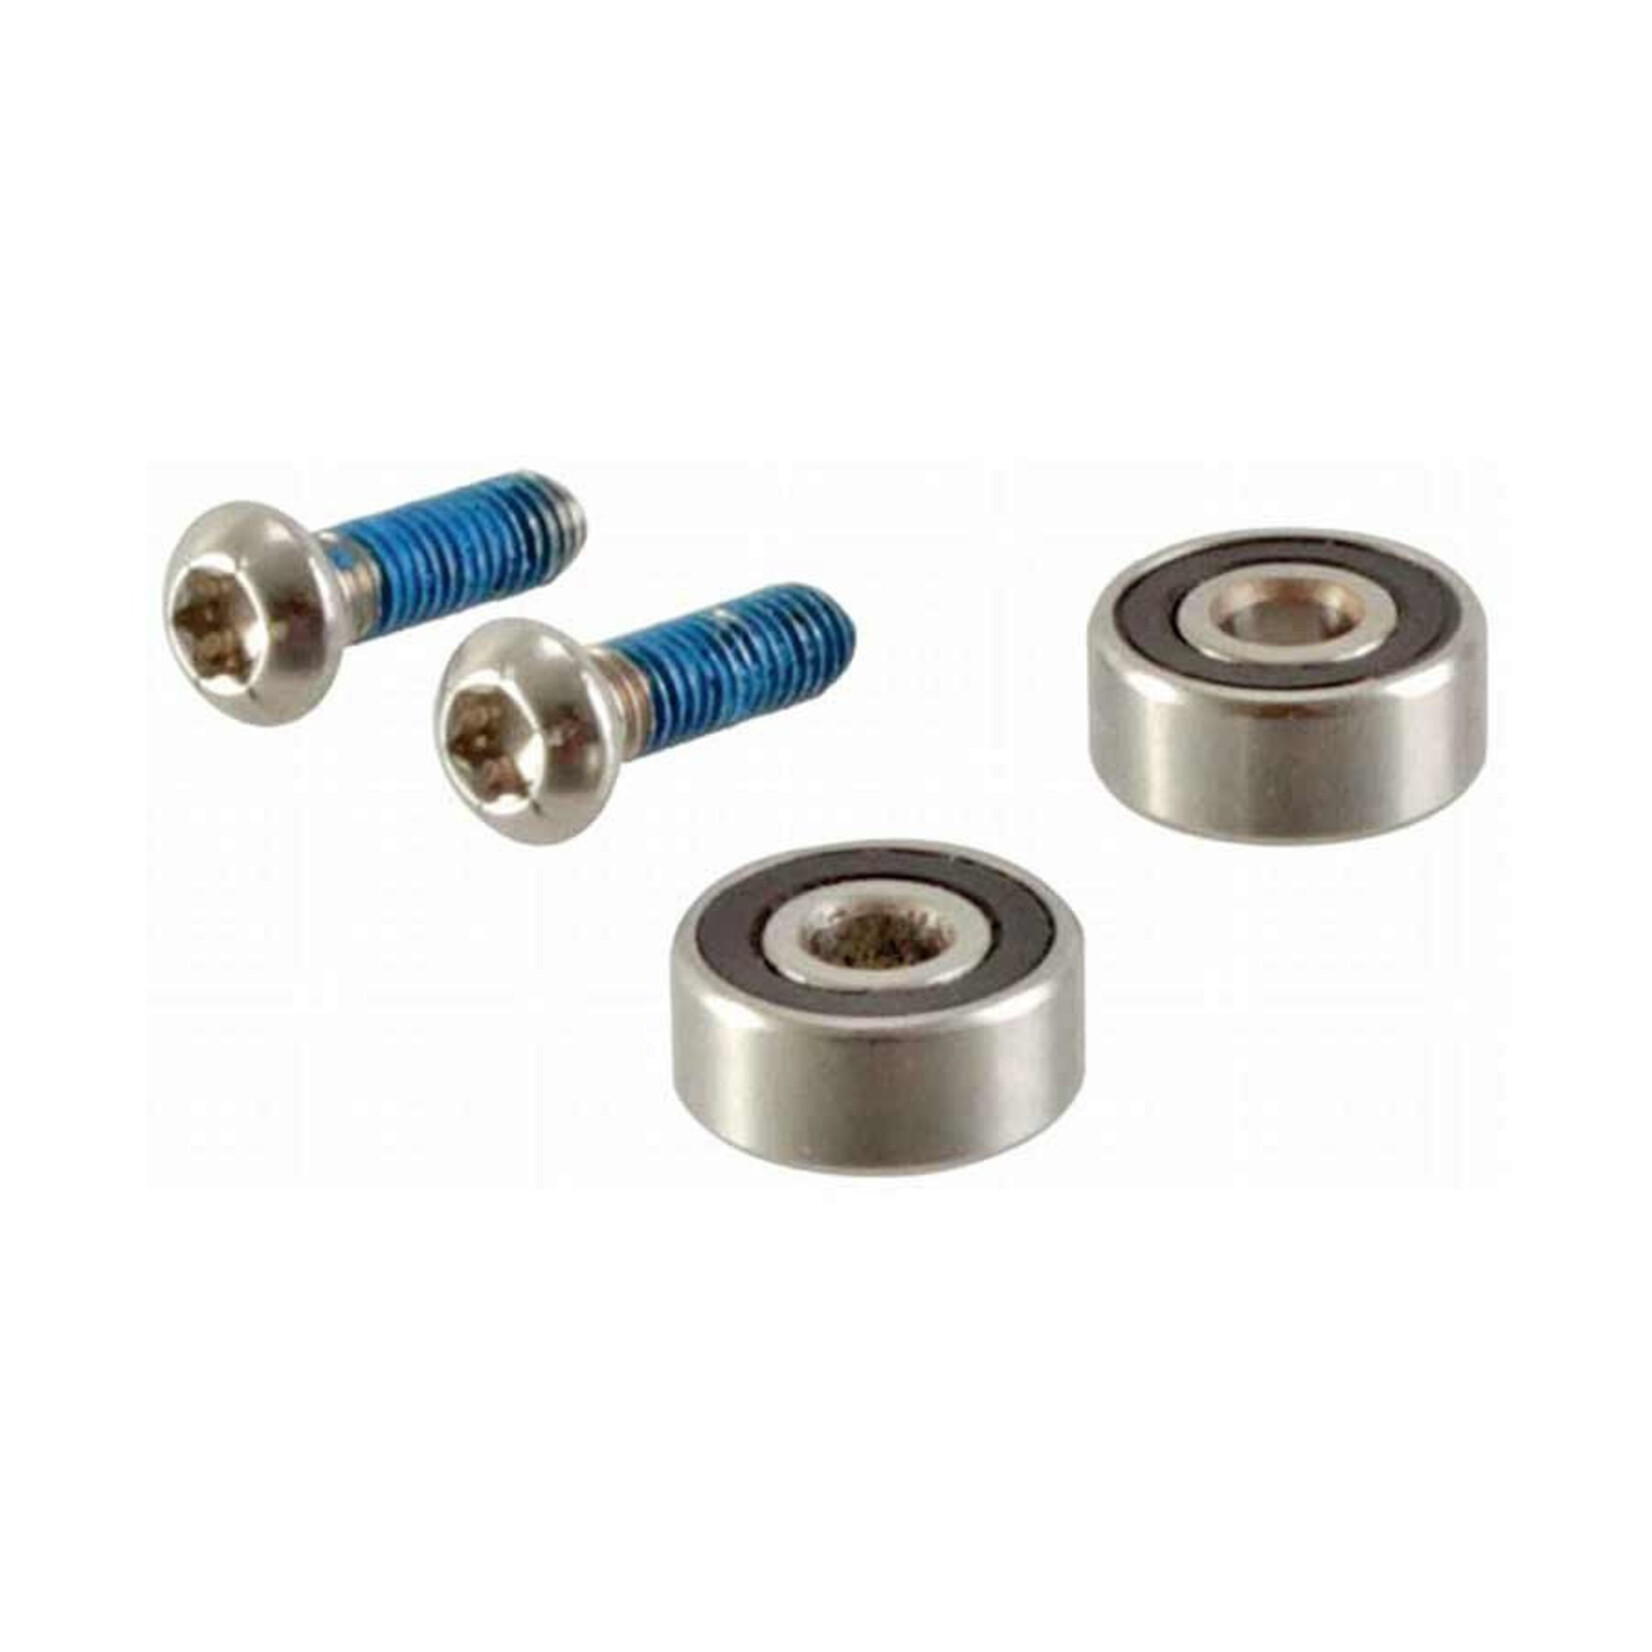 SRAM SRAM Disc Brake Lever Bearing Kit - For Guide RSC, Guide Ultimate, X0, Code RSC, Level Ultimate, and G2 Ultimate